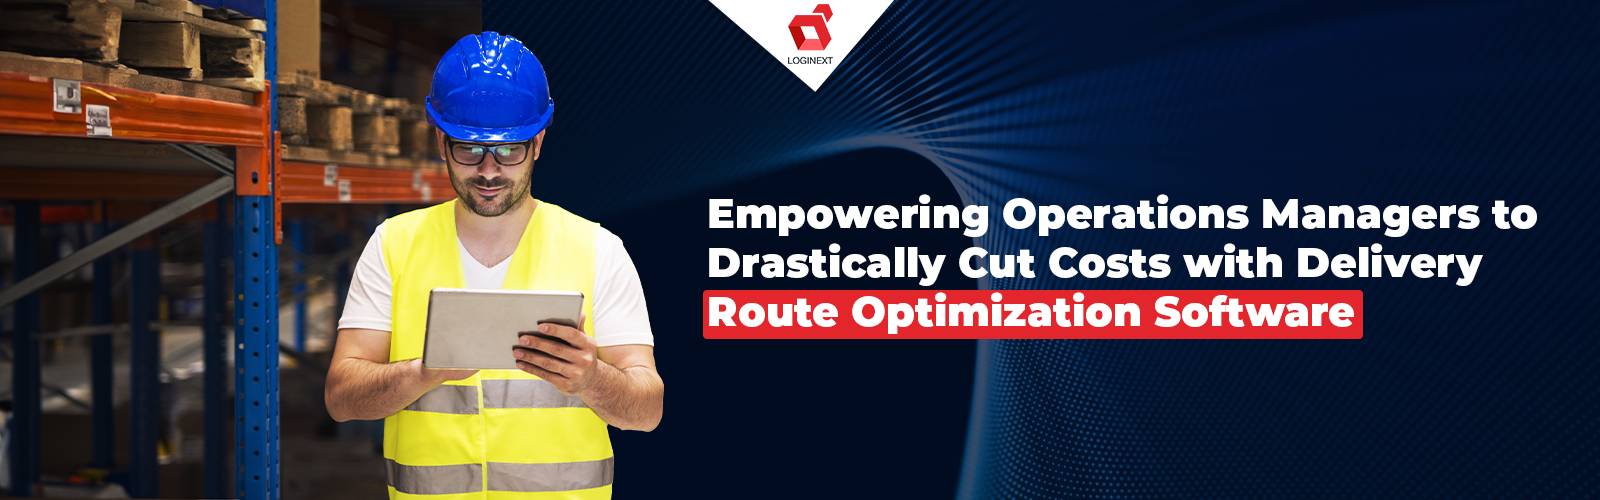 How does route optimization software empower operation managers